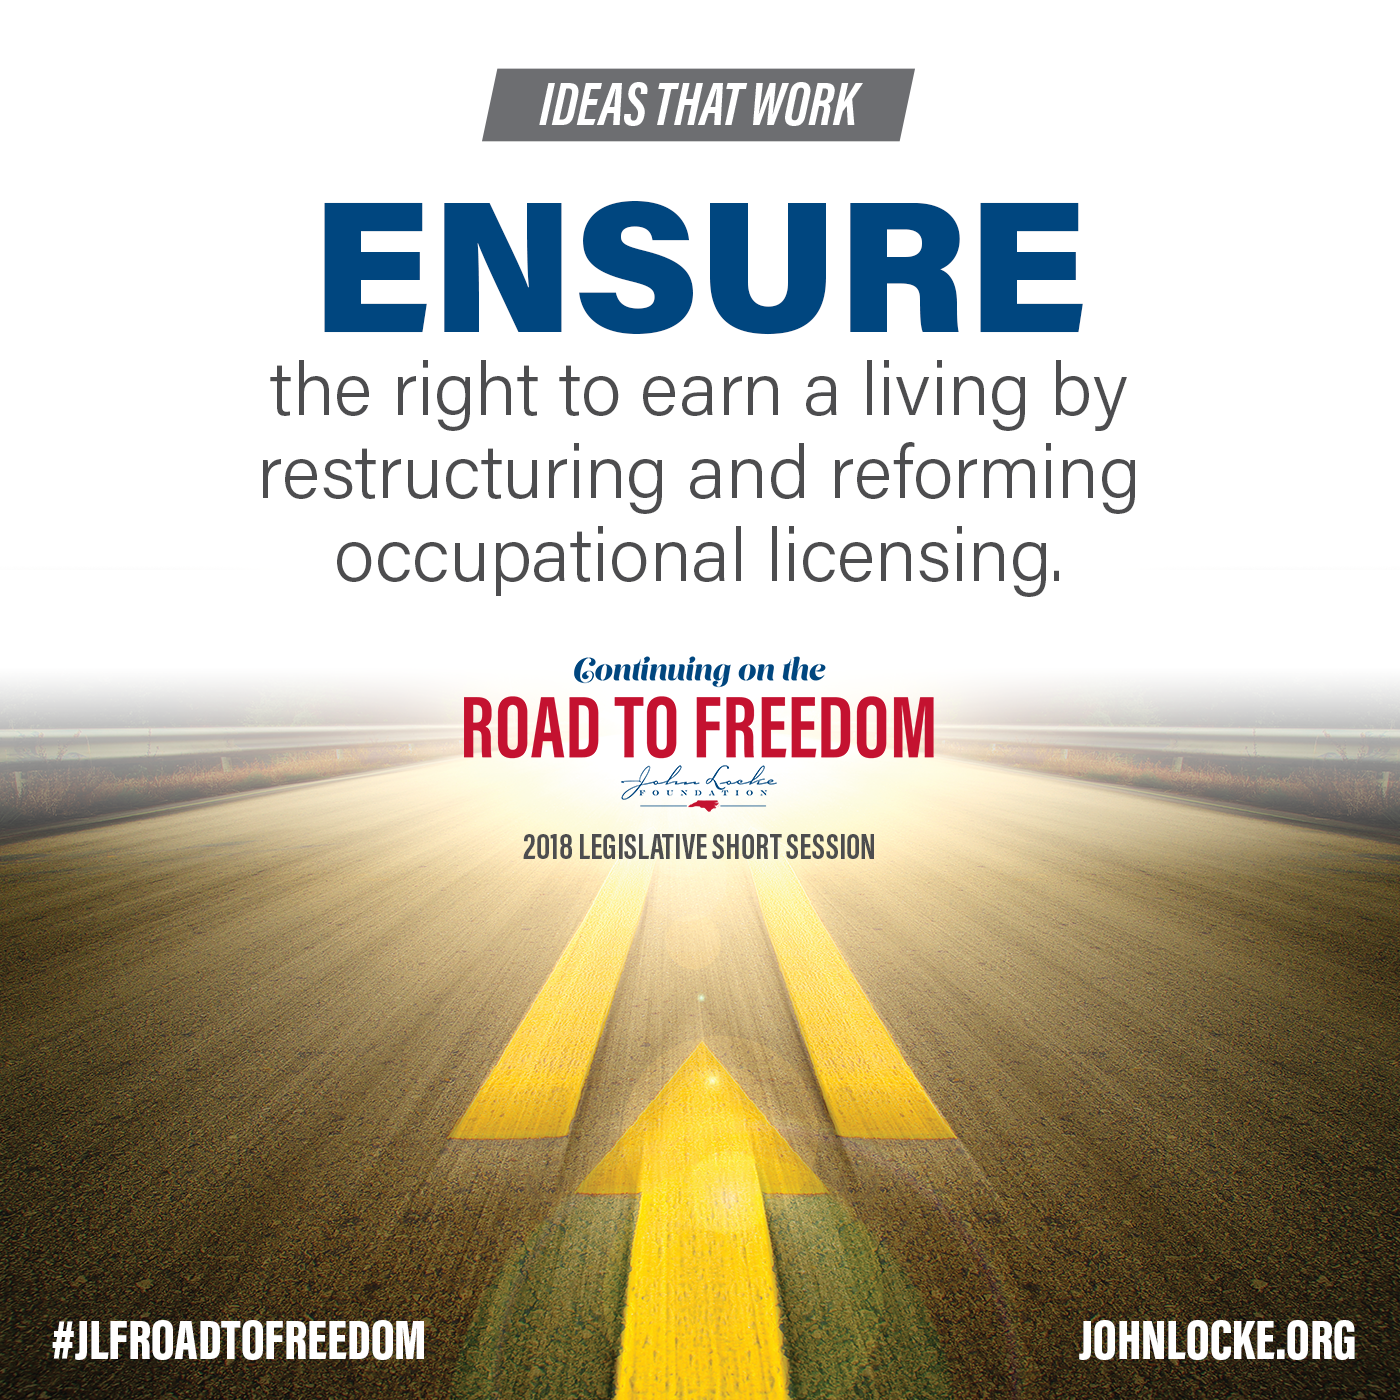 Road to Freedom occupational licensing